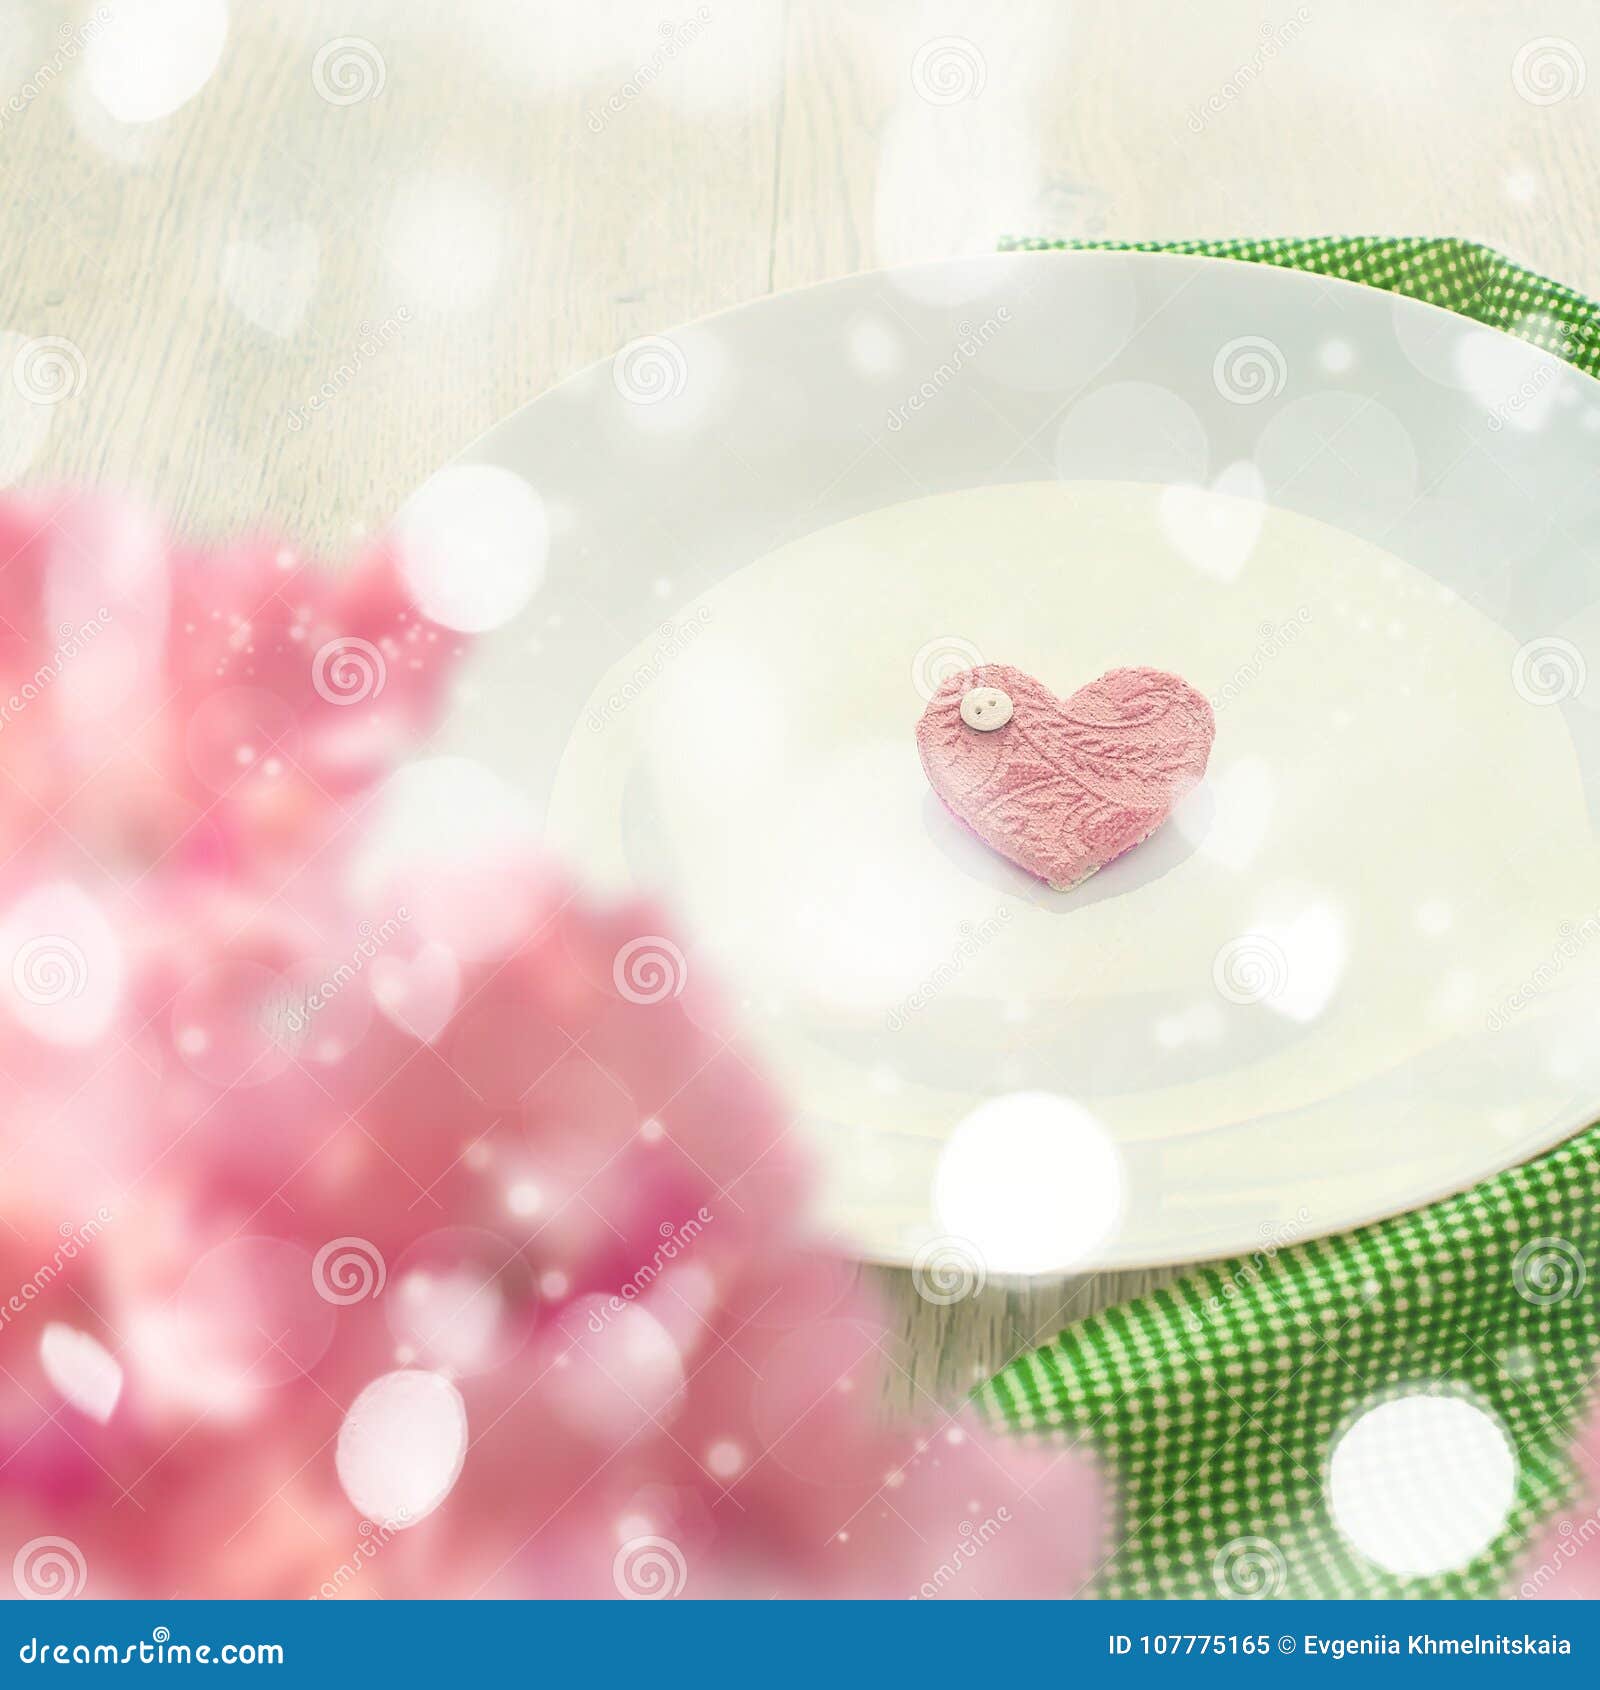 Romantic Heart on the Plate for Breakfast. Stock Image - Image of blank ...